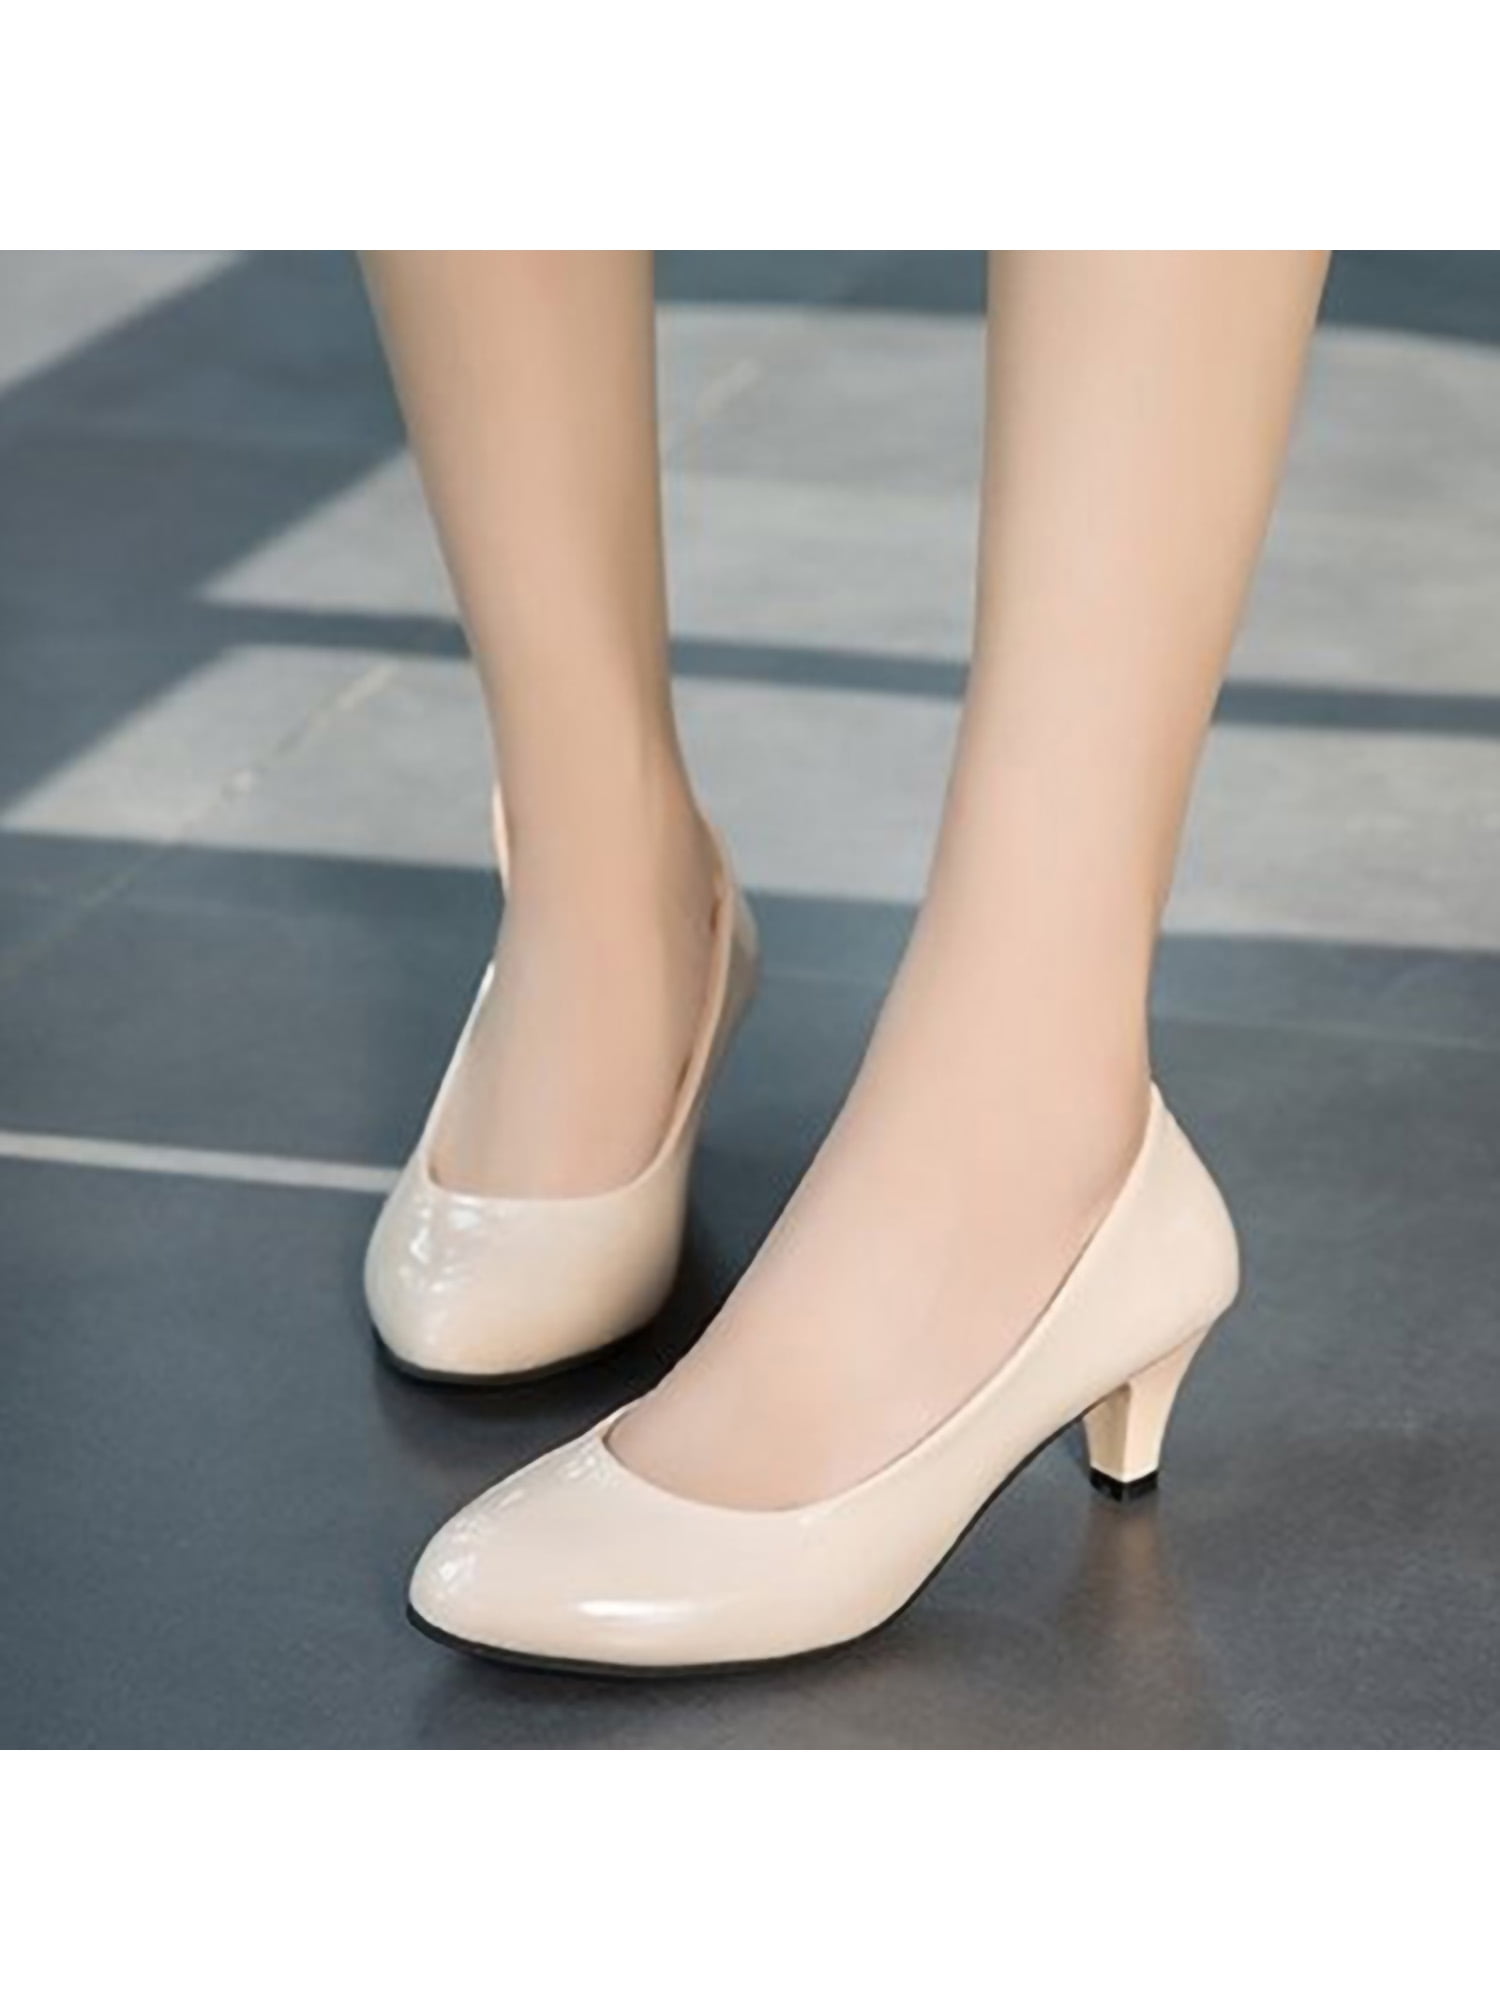 Court Shoes Pointed Ladies Kitten Heel Casual Work Dress Office Womens Size  New | eBay